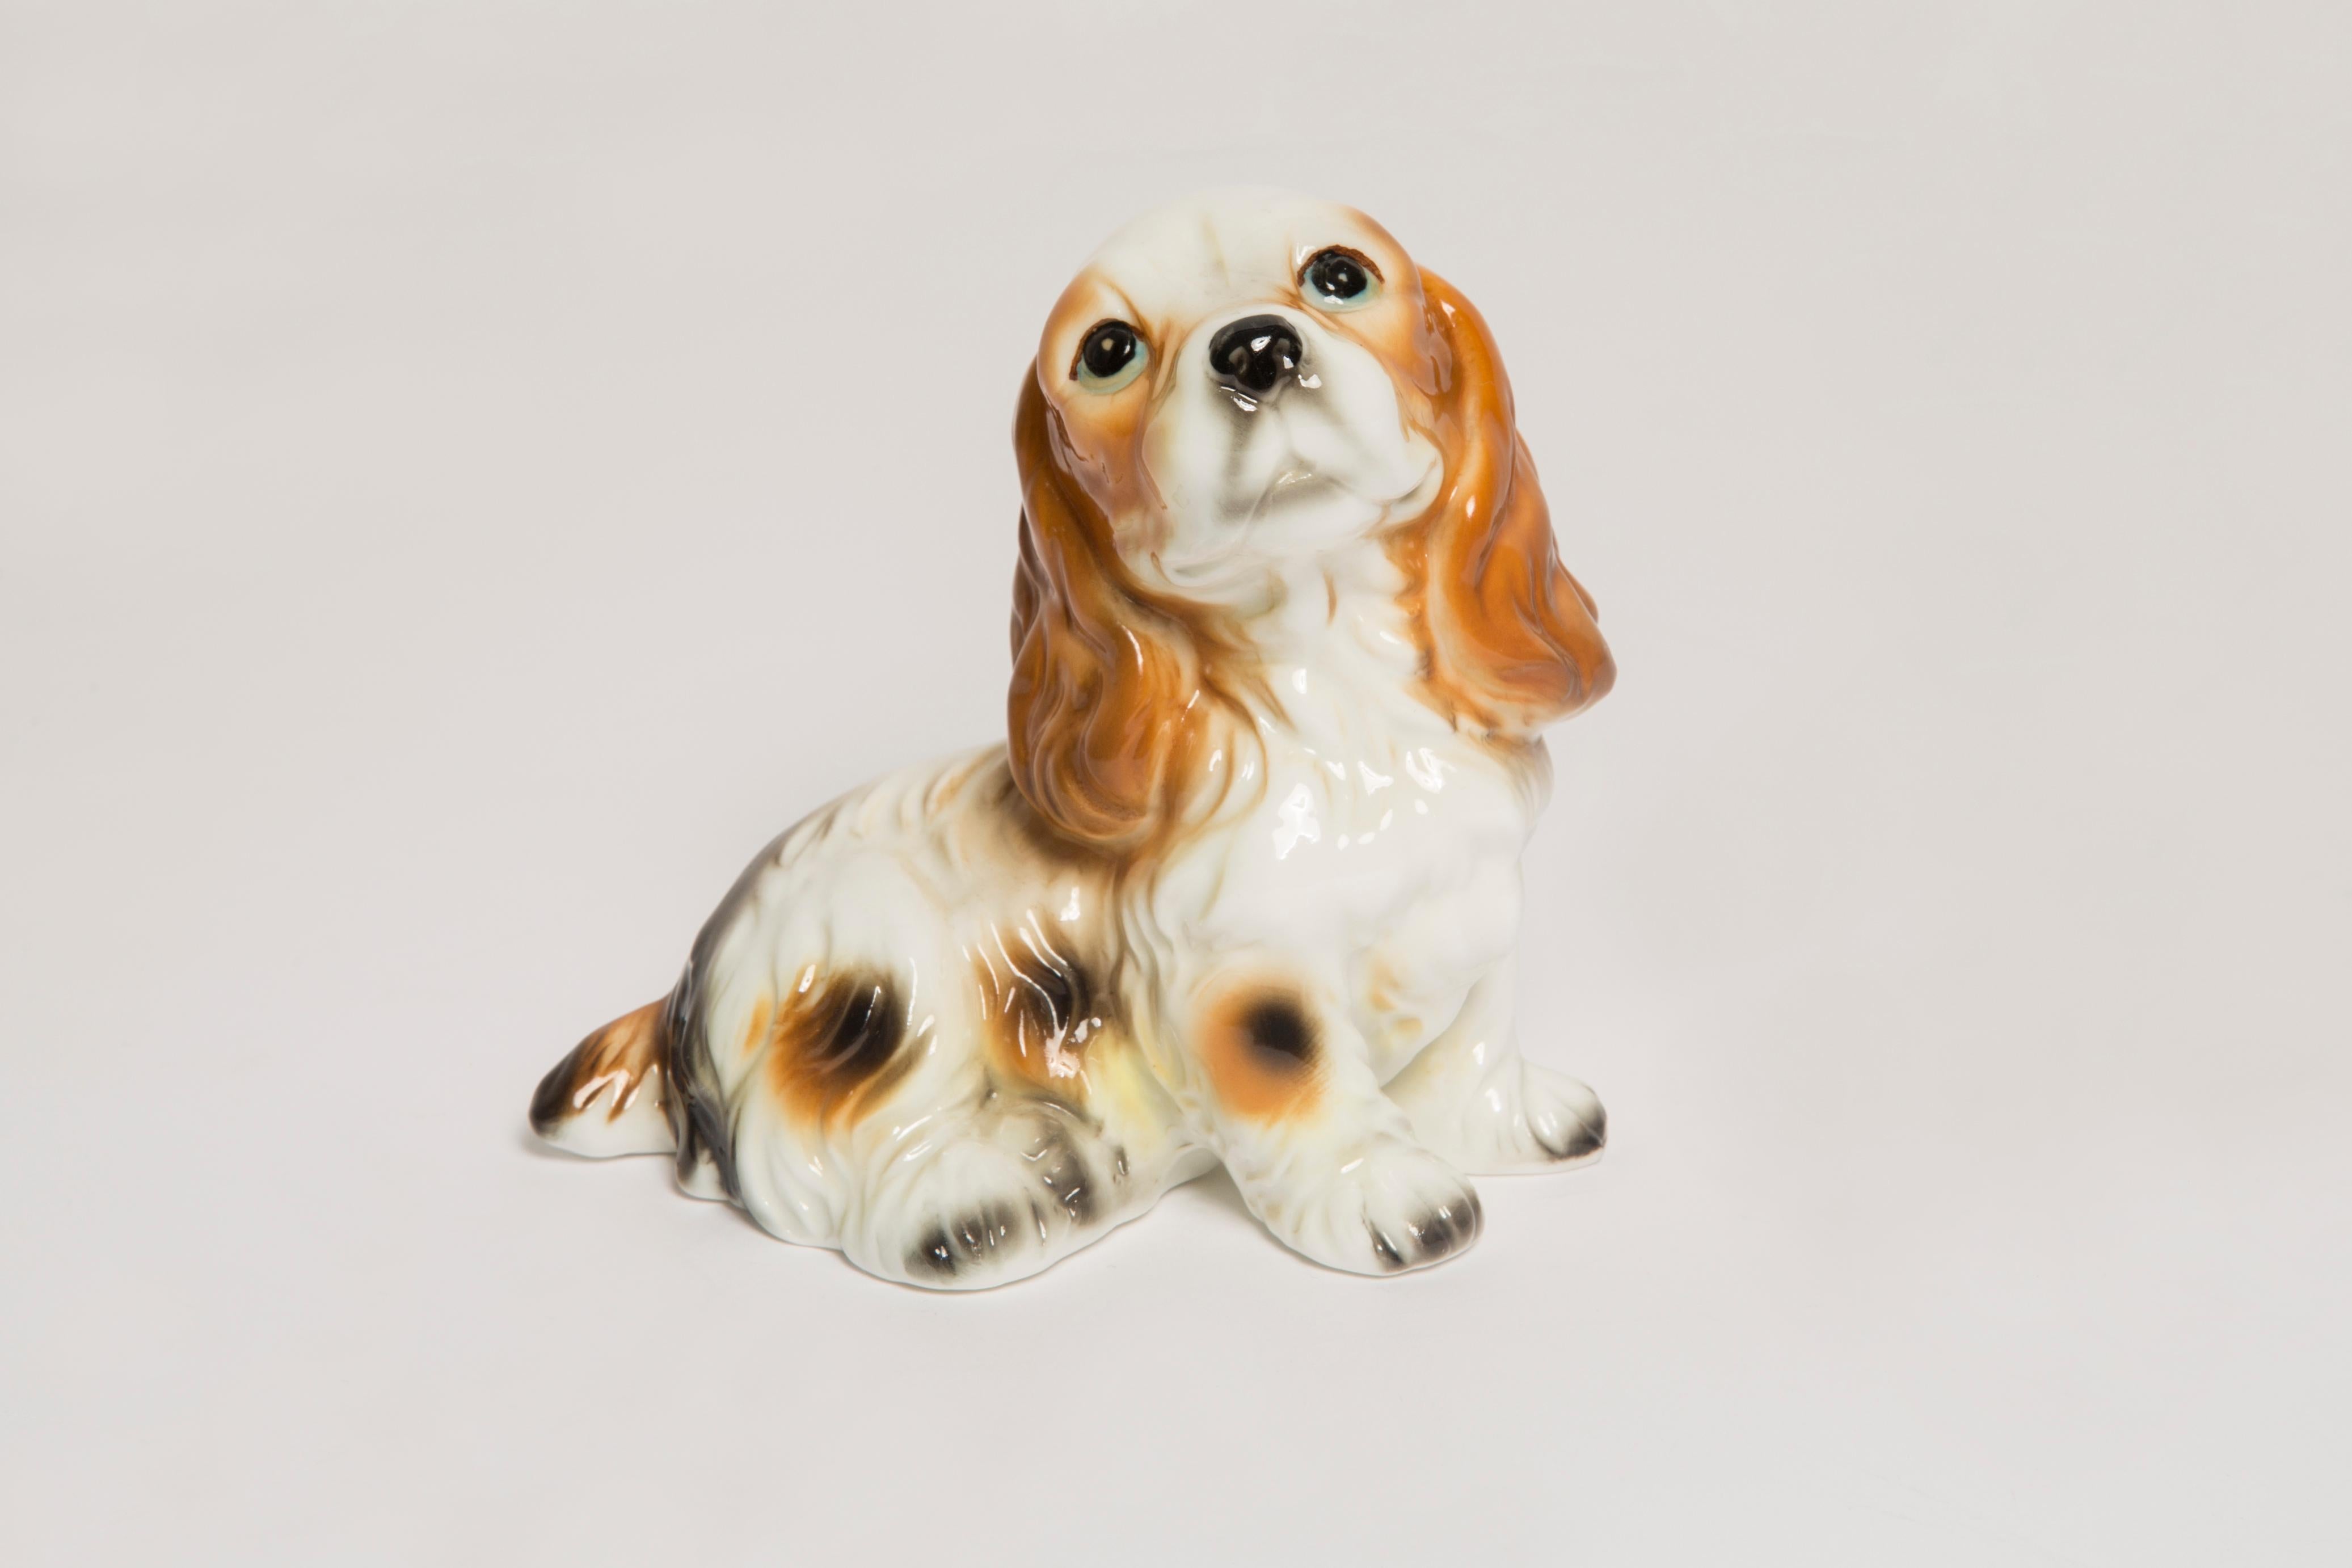 20th Century Midcentury Small White and Red Spaniel Dog Sculpture, Taiwan, 1960s For Sale